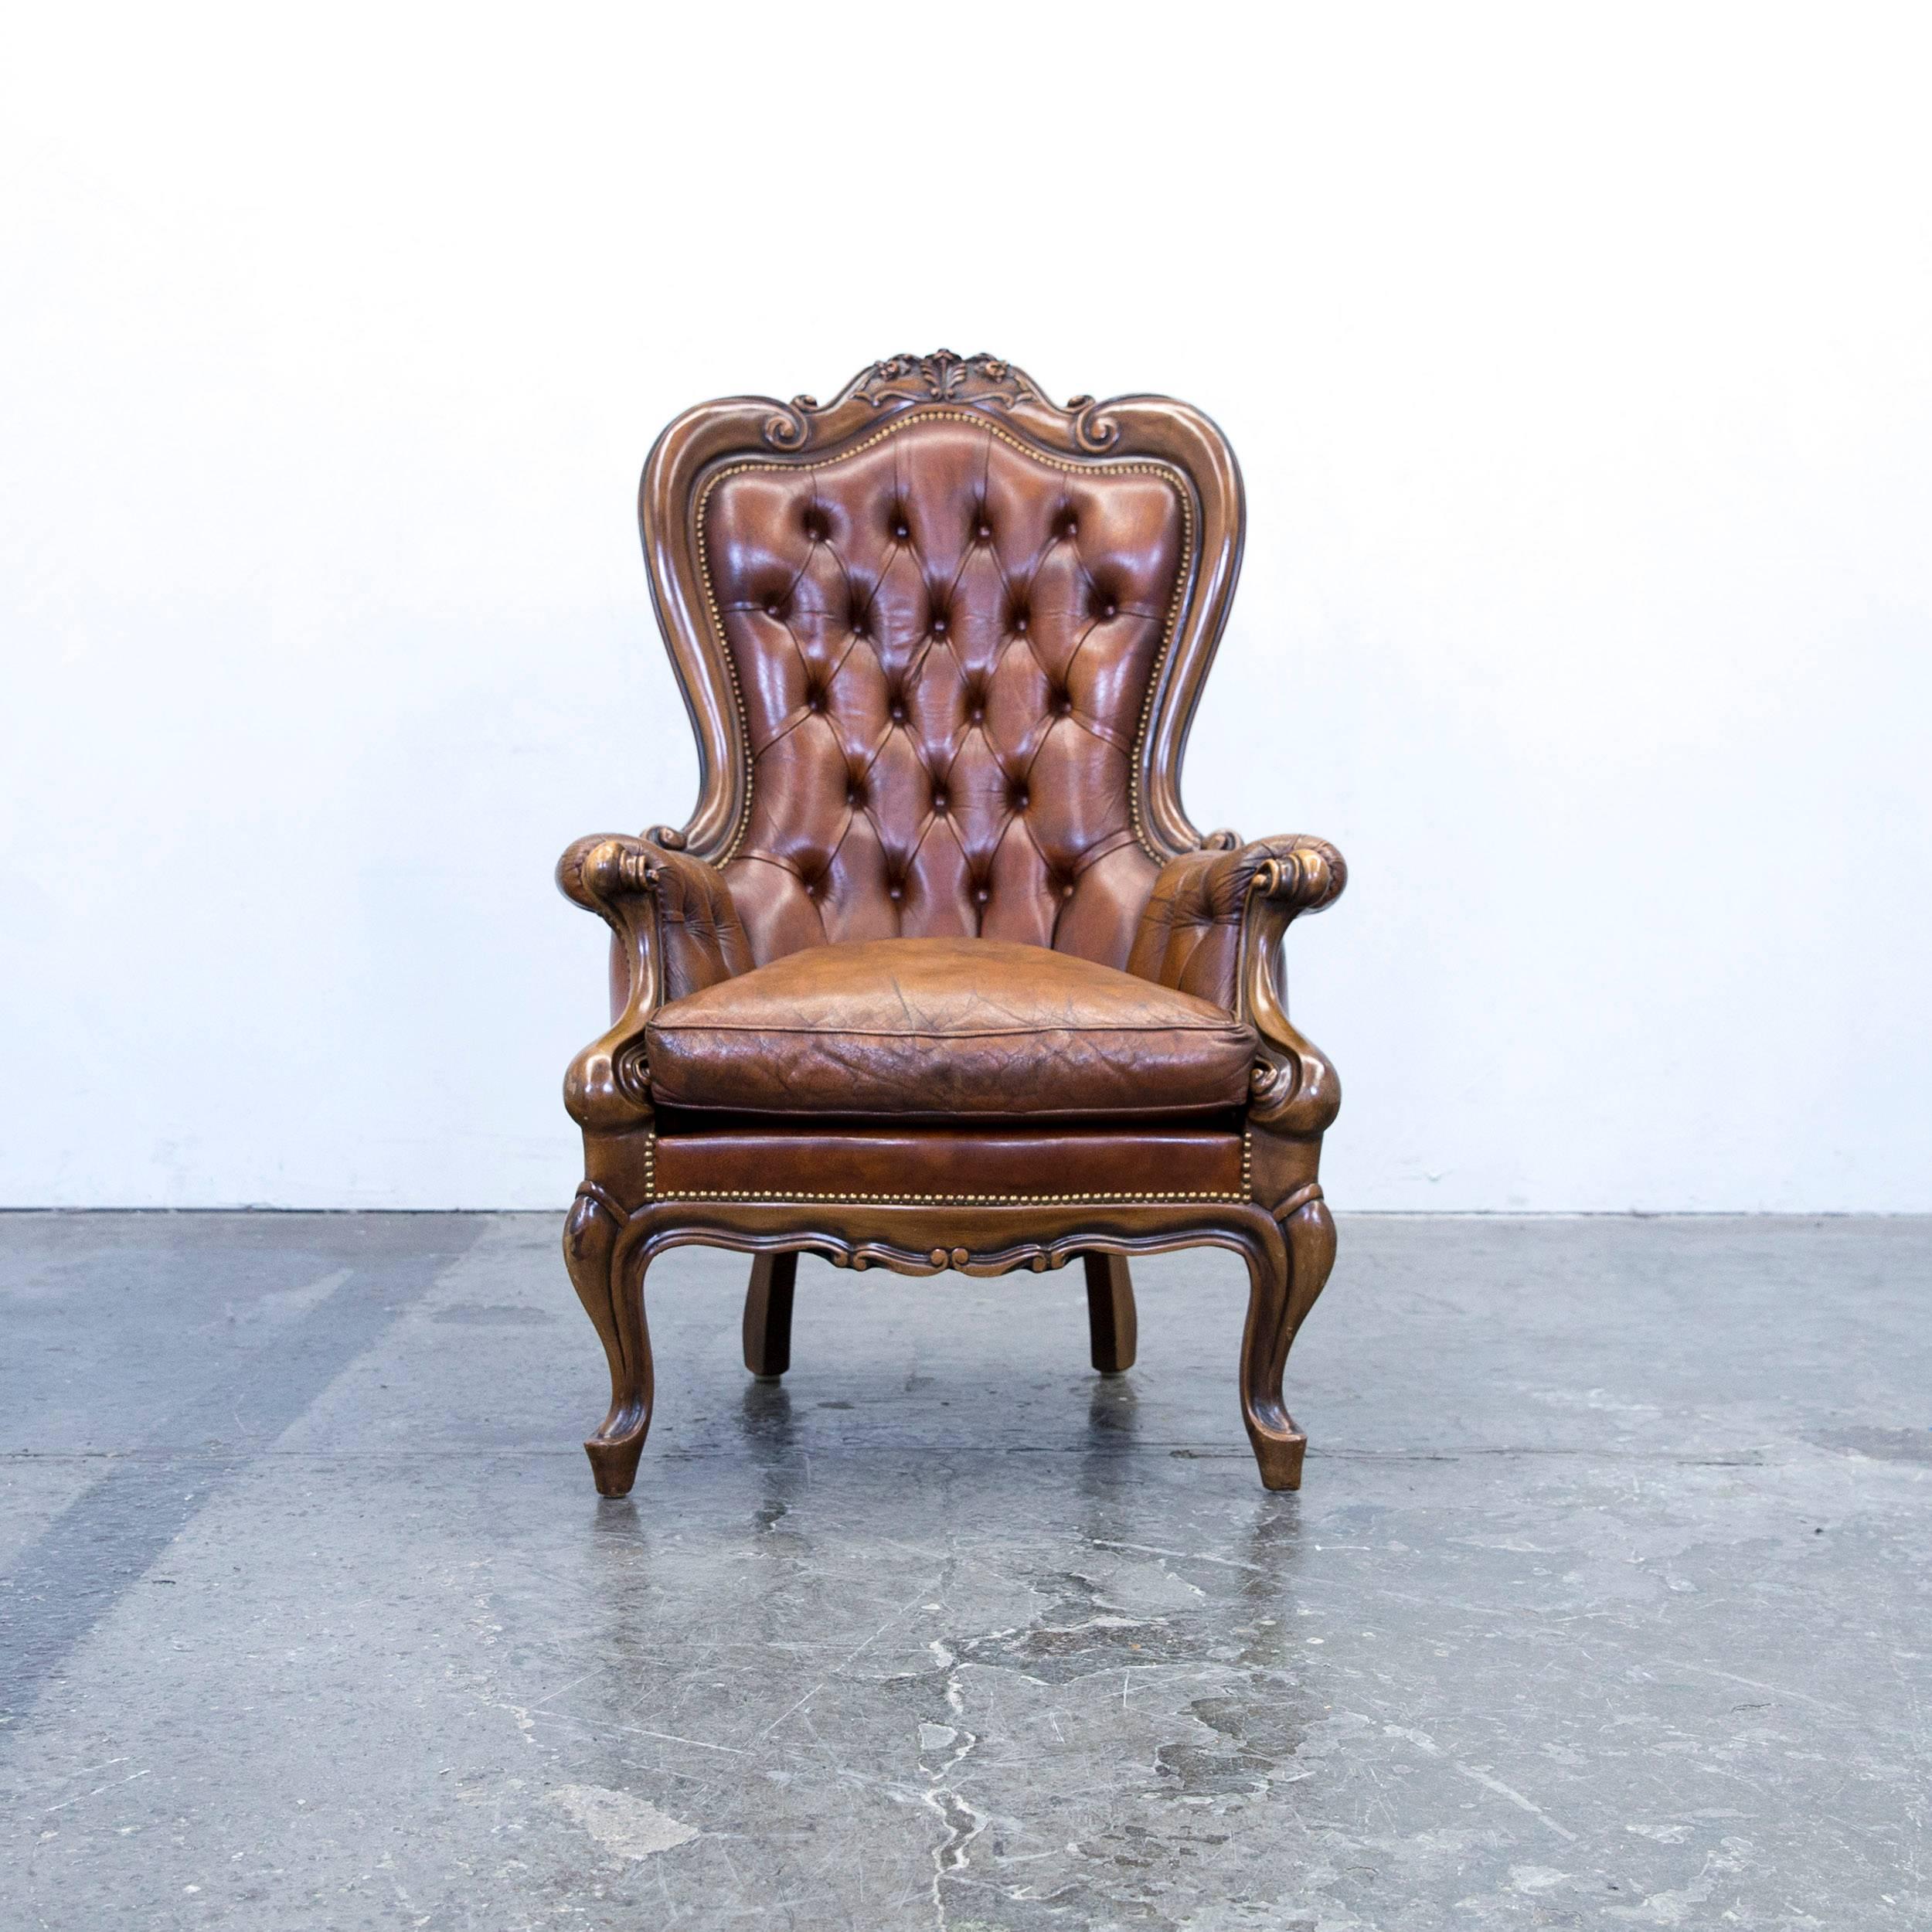 Brown colored original Chesterfield leather armchair, in a vintage design, made for pure comfort.